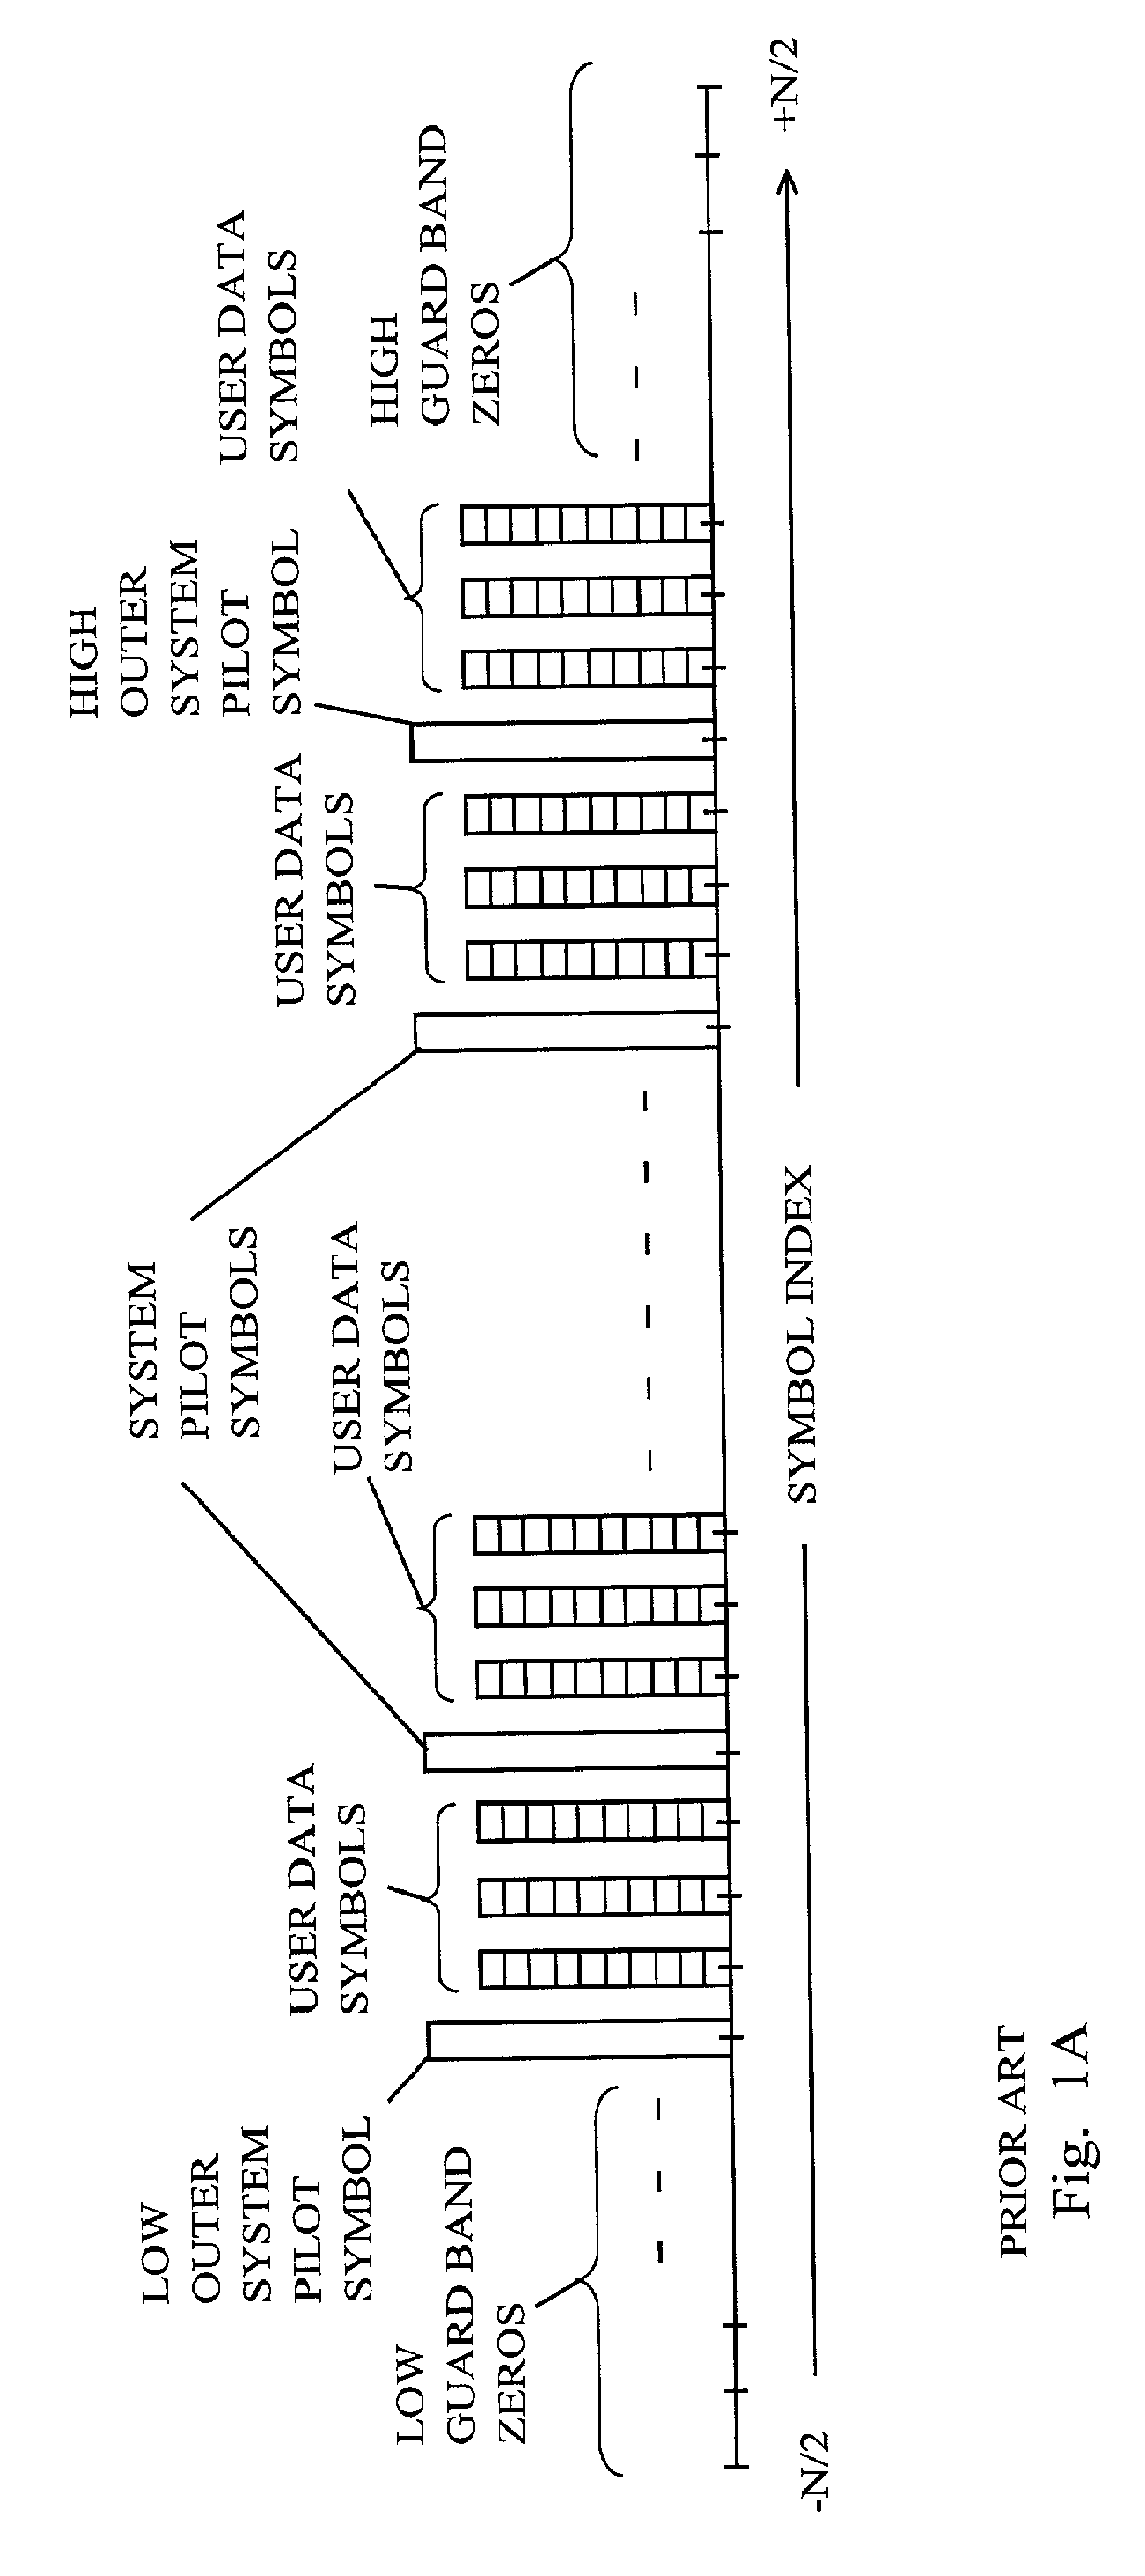 Method and Apparatus for Multicarrier Channel Estimation and Synchronization Using Pilot Sequences